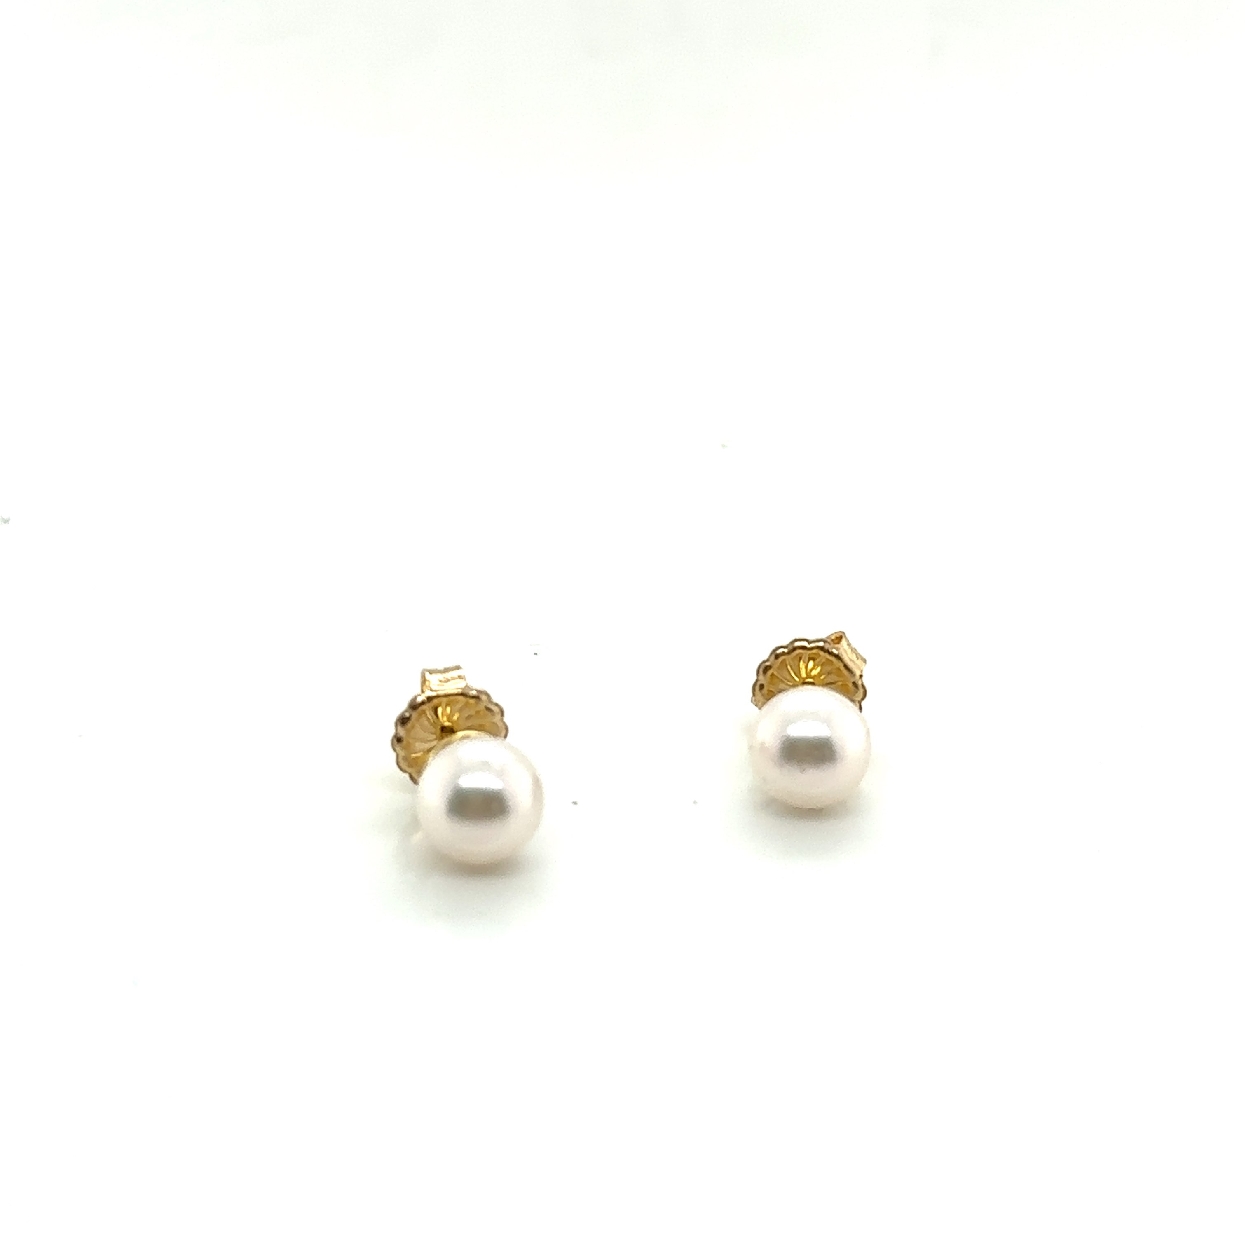 7mm Akoya Pearl Studs with Yellow Gold Stud Backing